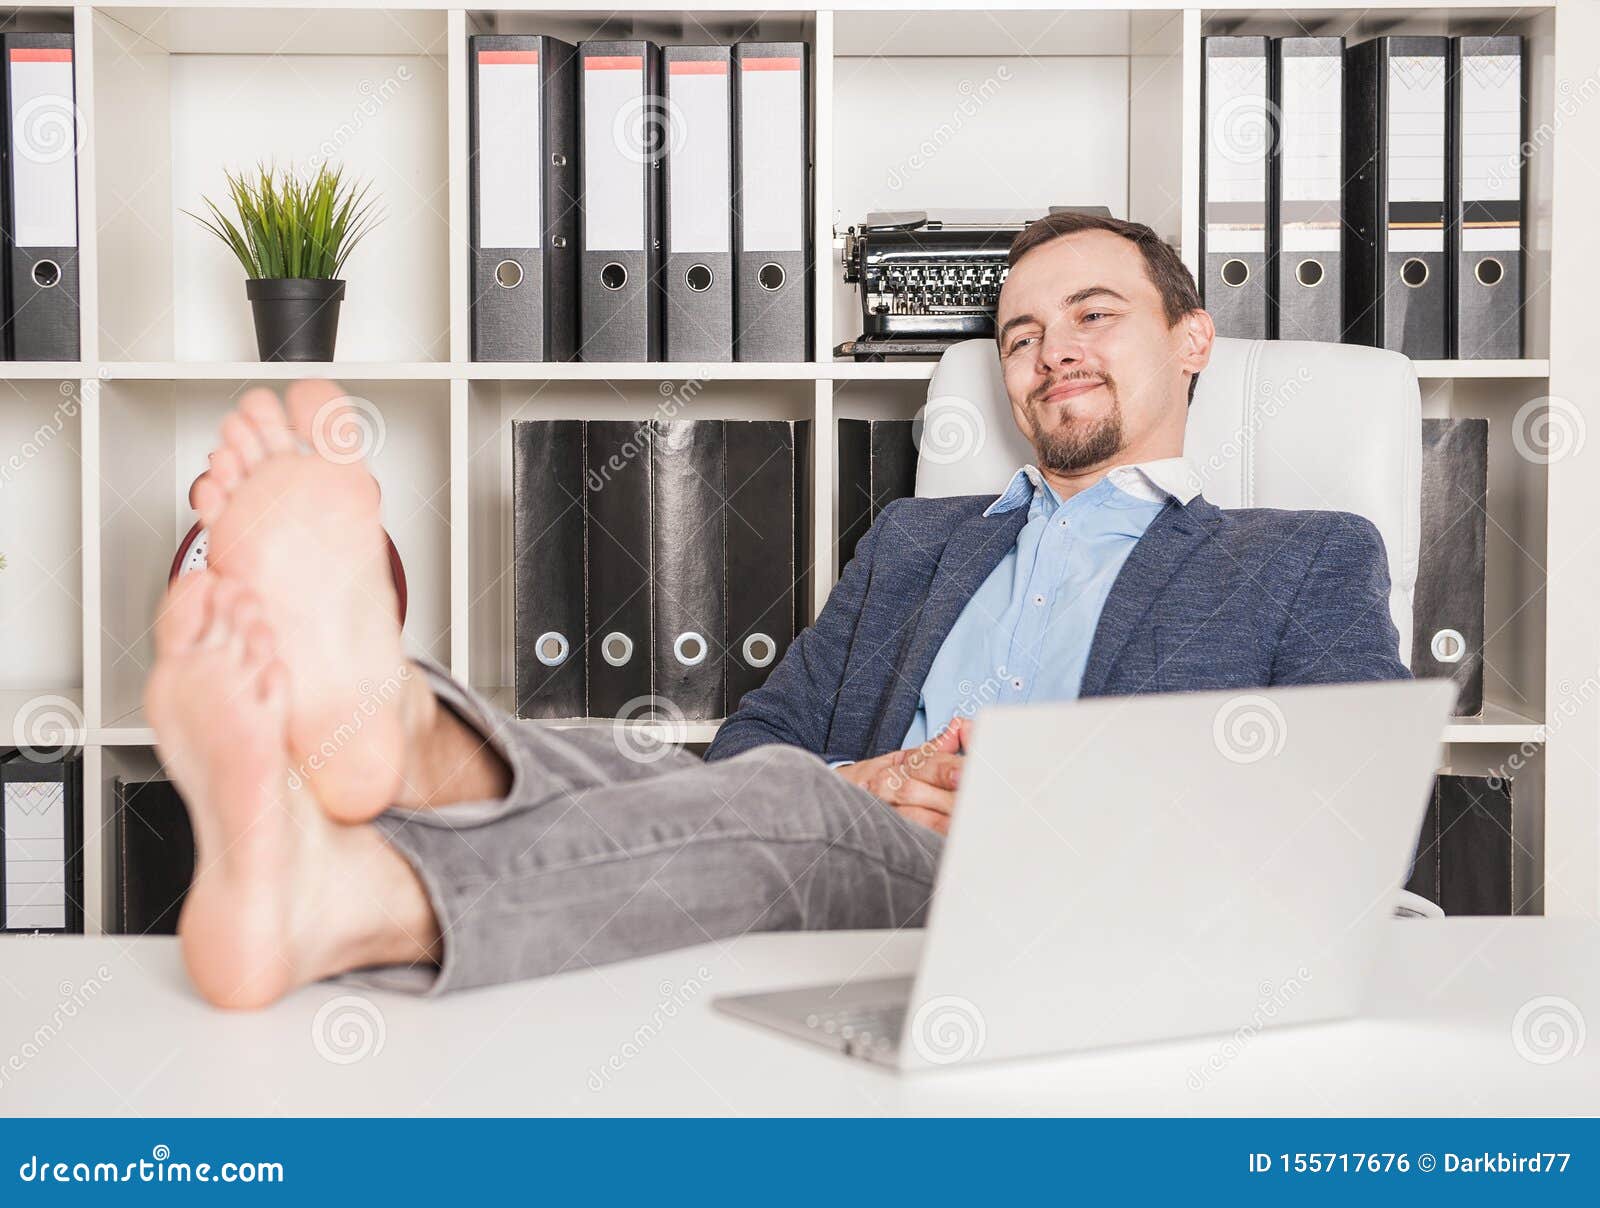 Barefoot Business Man Relaxing in Office Stock Photo - Image of male,  business: 155717676